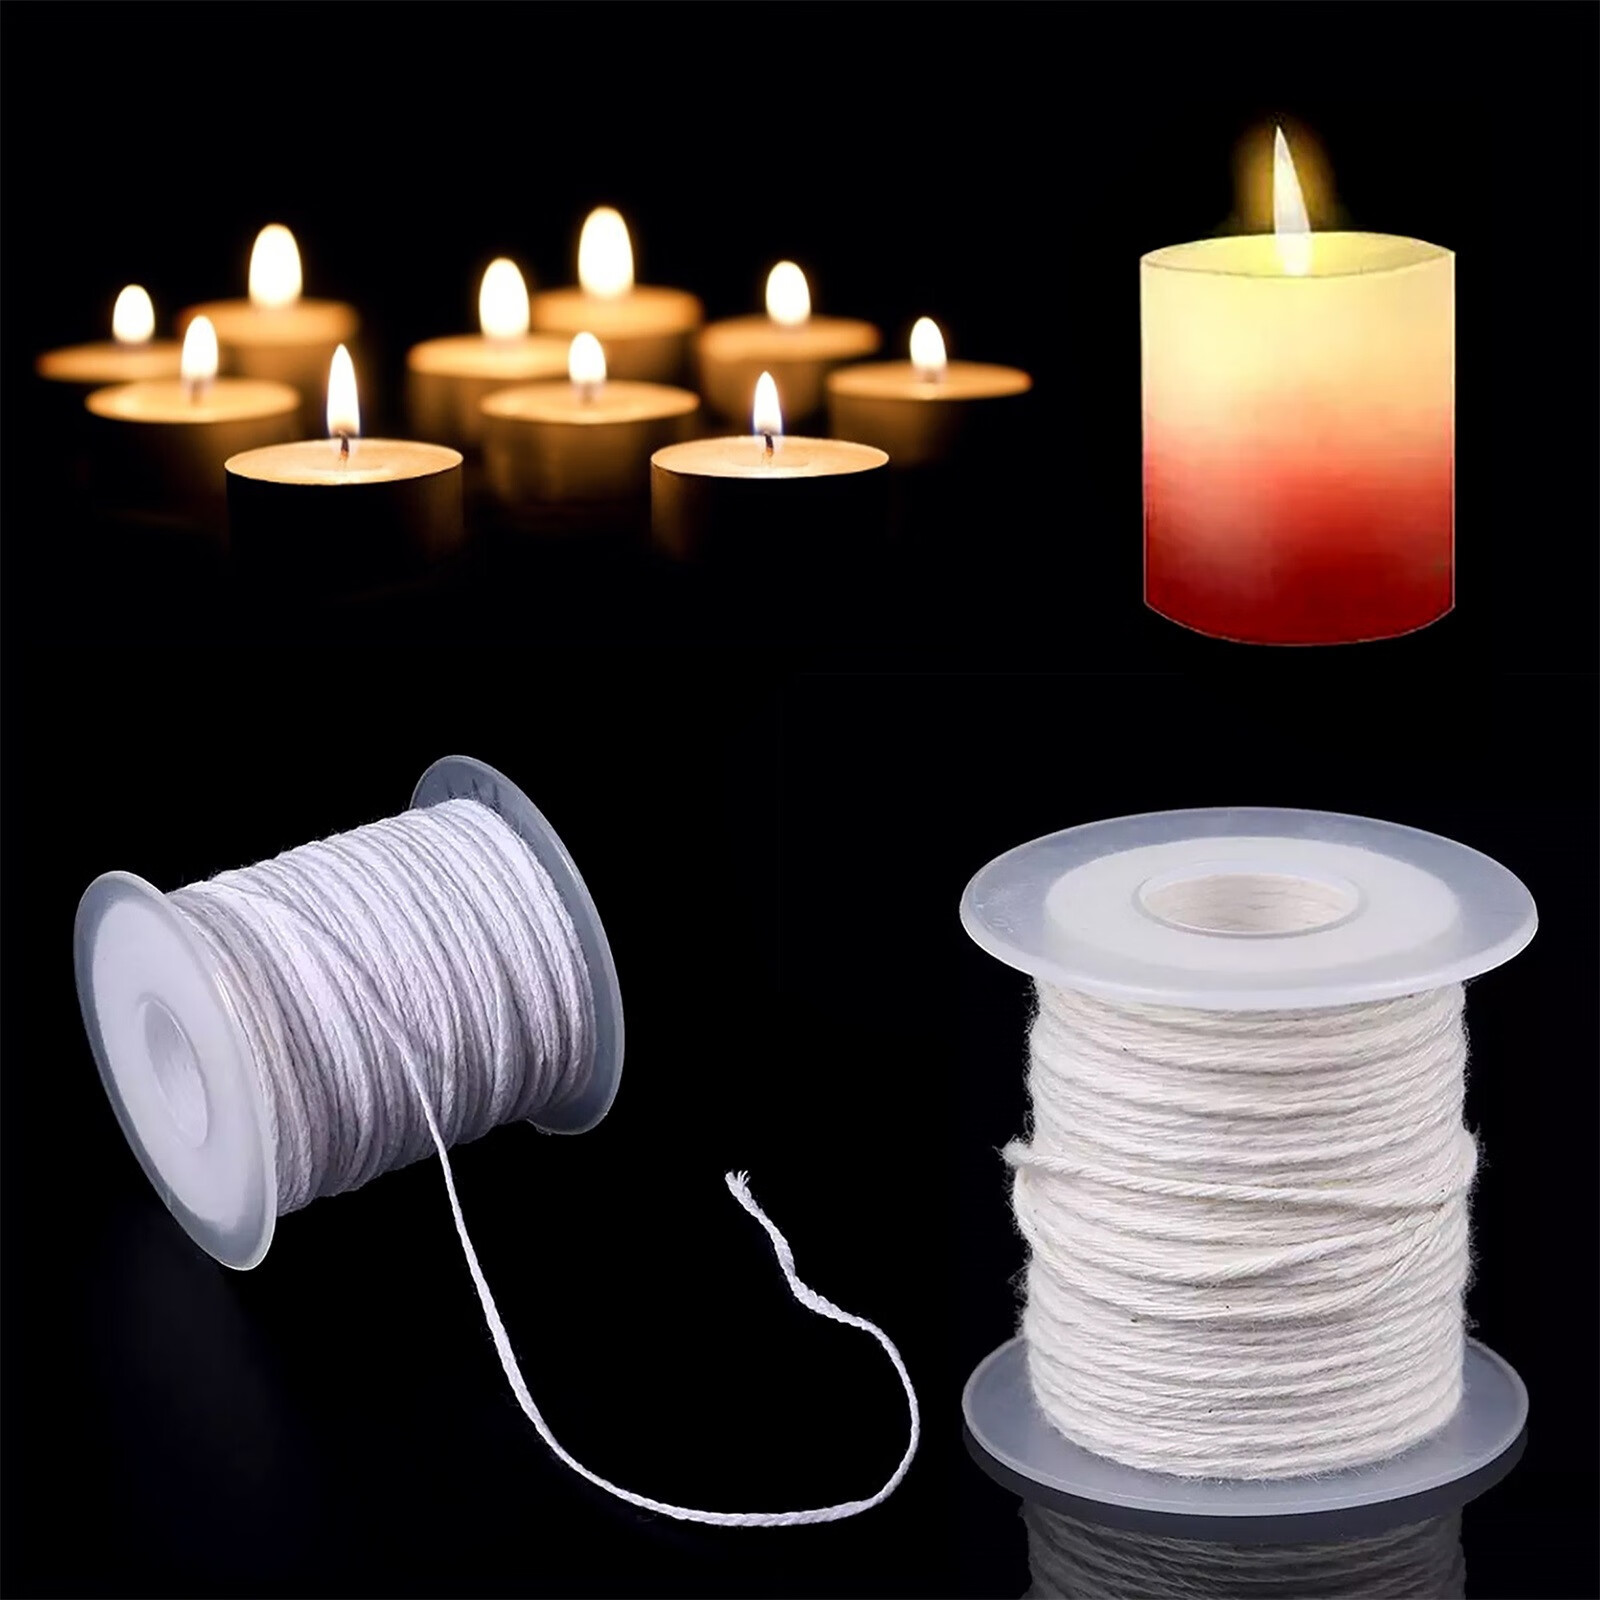 Sehao Diy Candle Wick Roll 61M Cotton Rope for Making Candles, Candle Core  Multicolor Cotton Thread